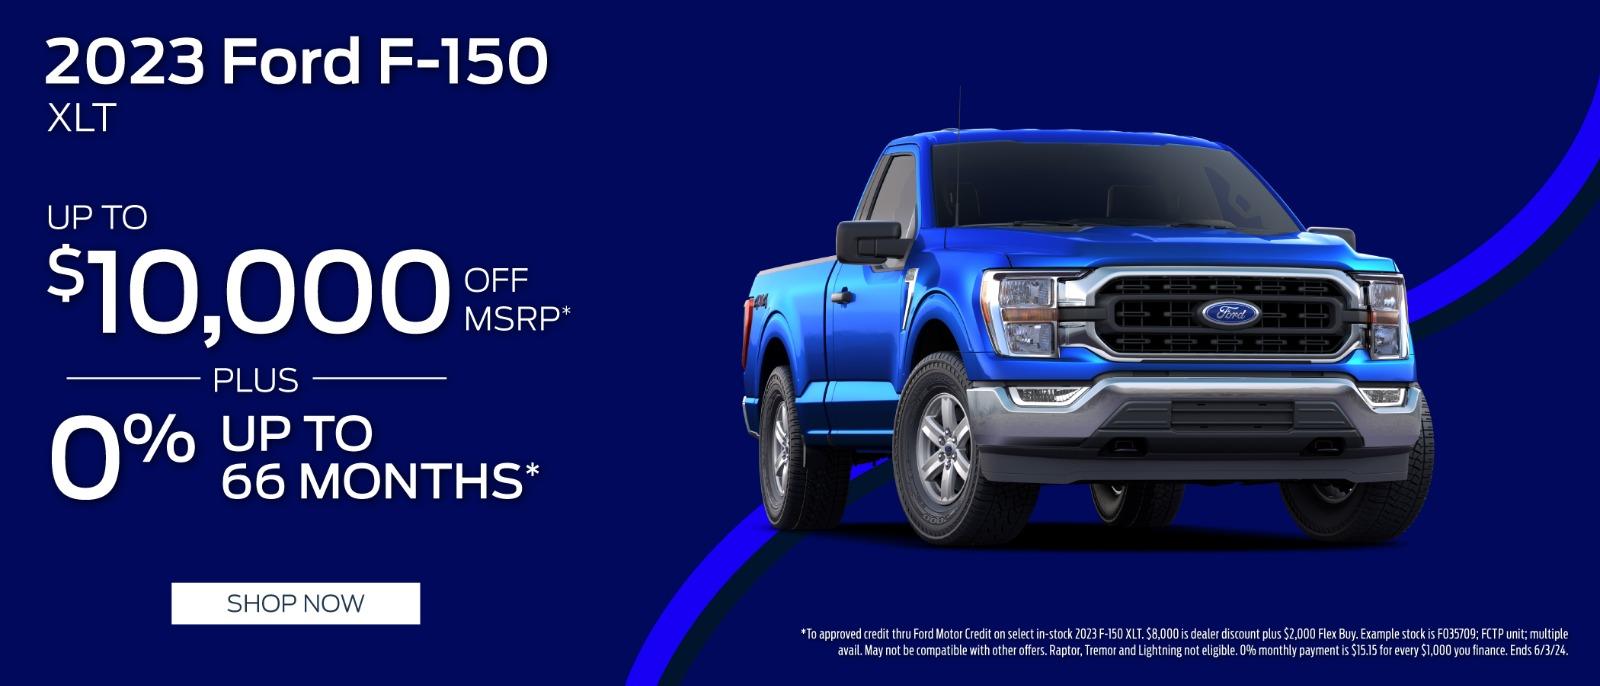 2023 Ford F-150  up to $10,000 off MSRP Plus 0% up to 66 months